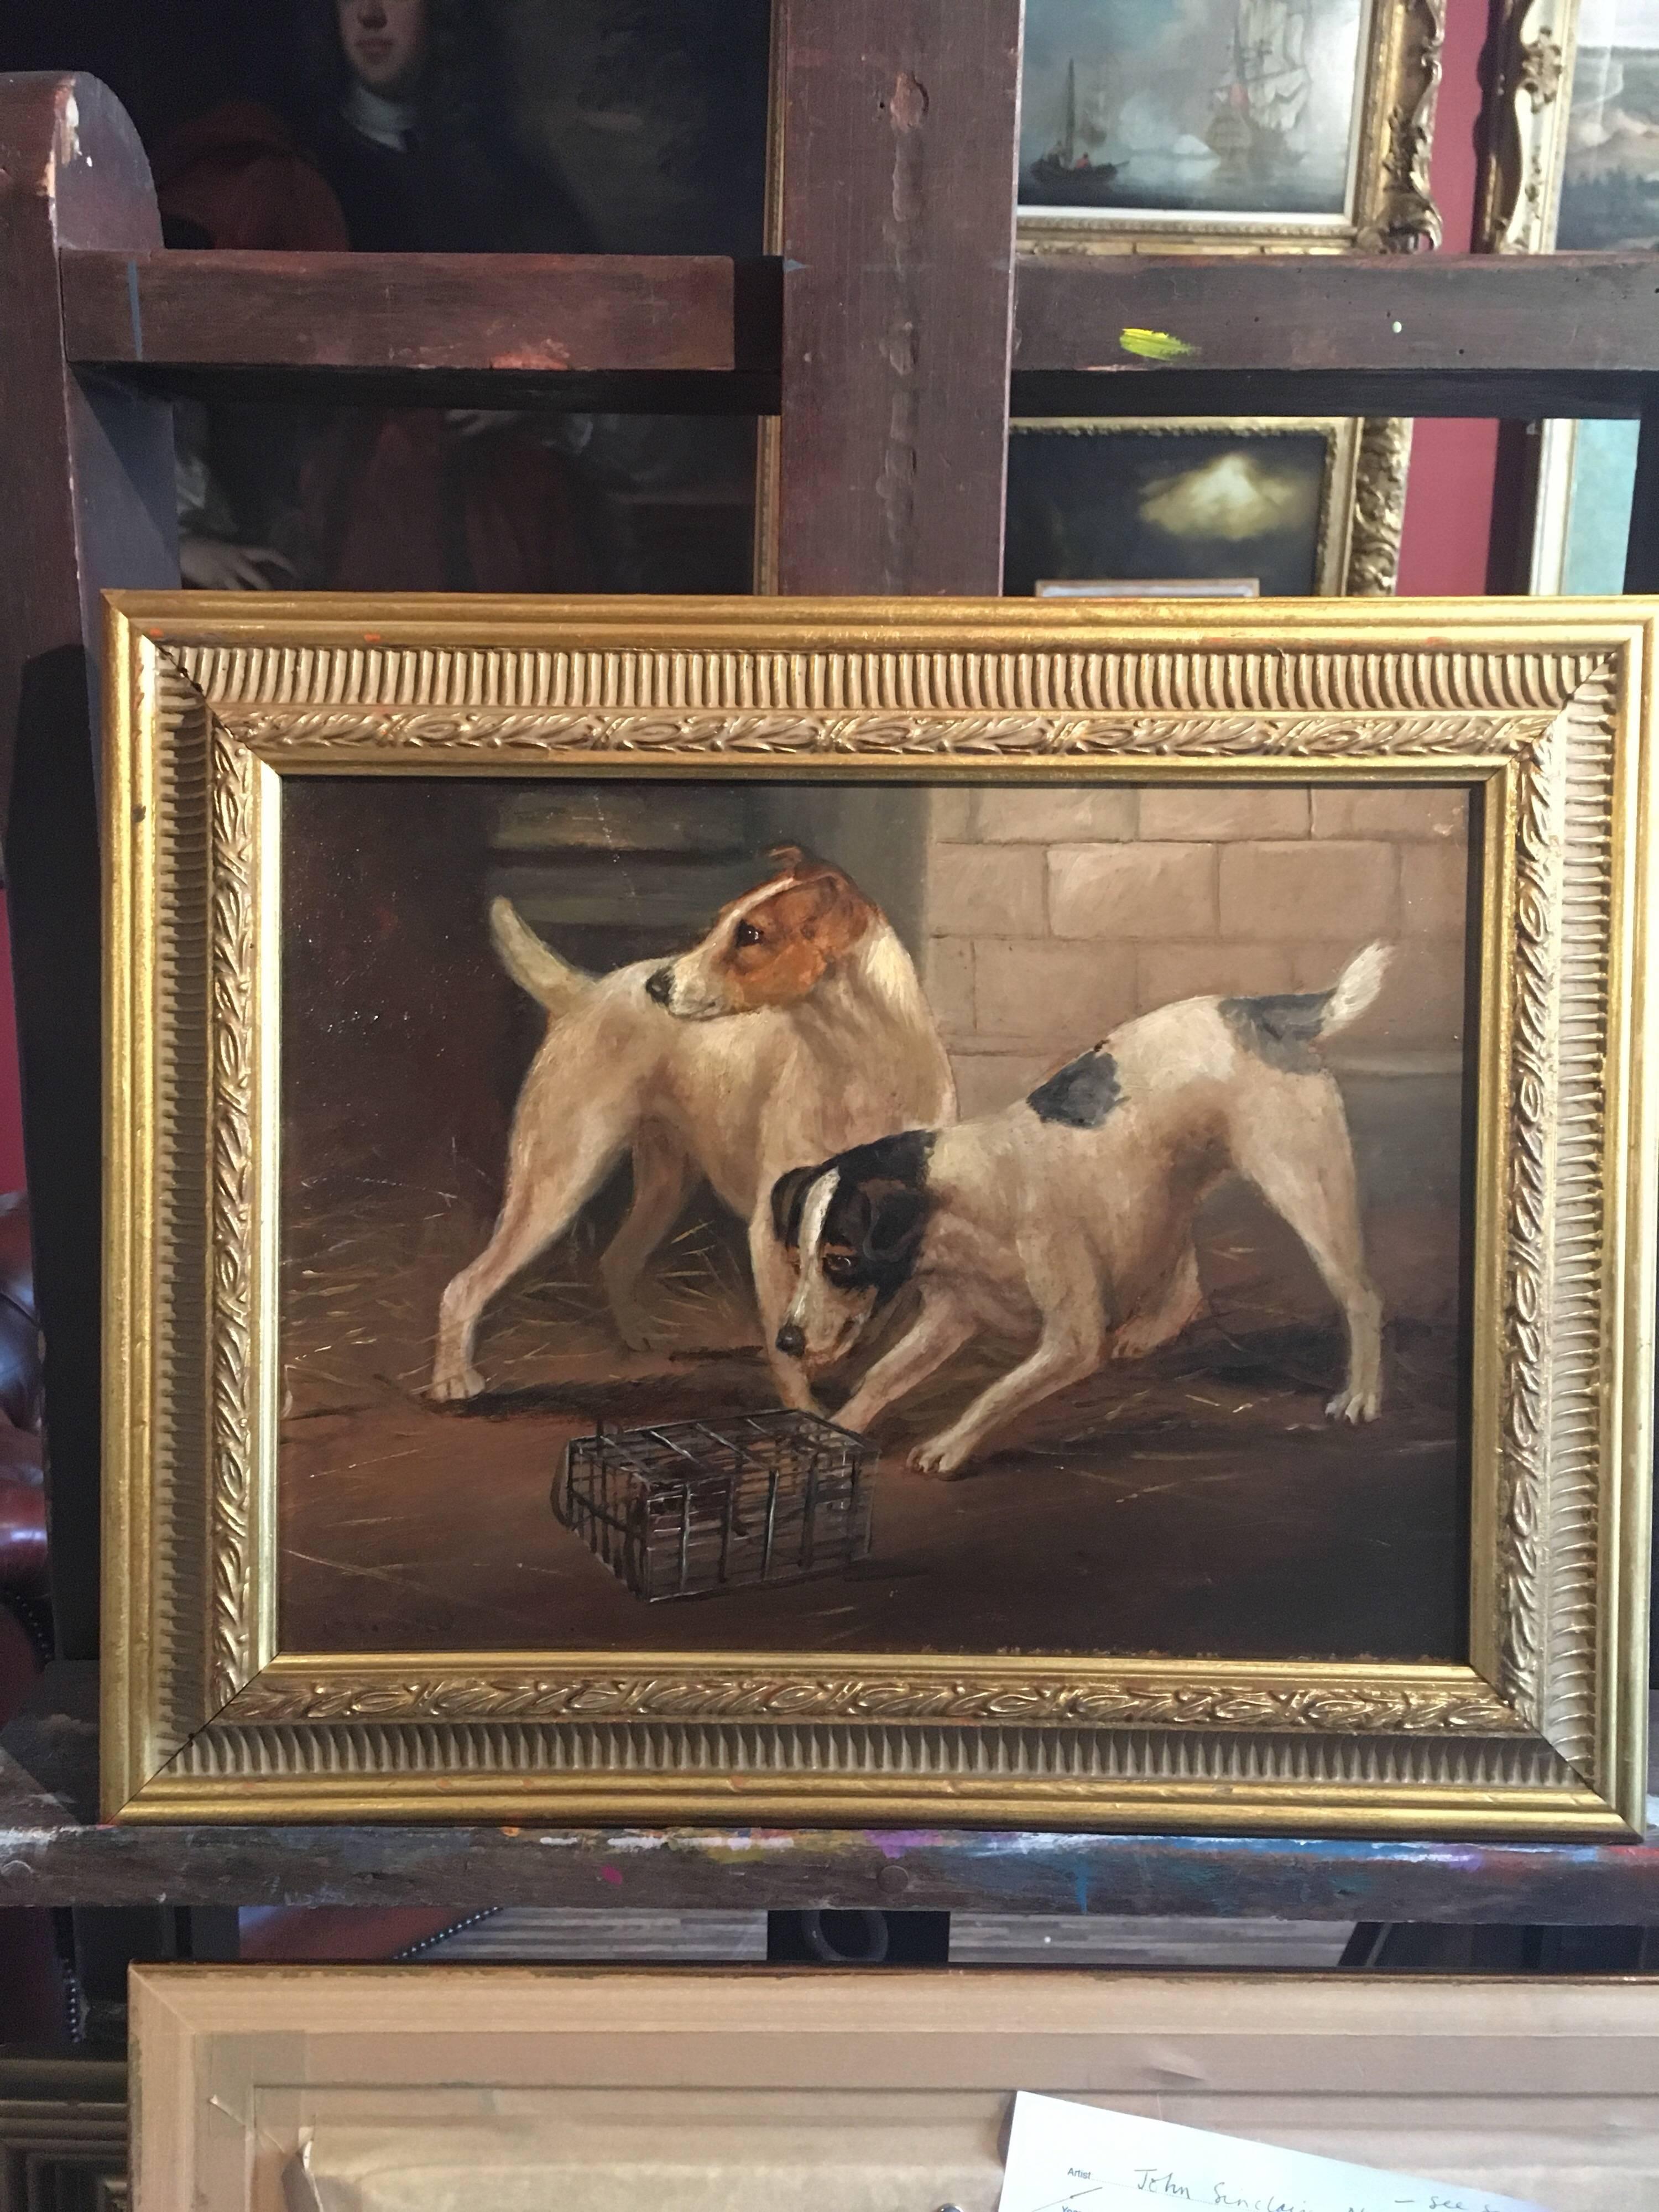 Terriers Ratting, Barn Interior,  Antique English Oil Painting 
By English artist, late 19th Century
Faint signature on the lower left hand corner
Oil painting on board, framed
framed size: 16 x 20 inches

Lovely late Victorian oil of two Jack